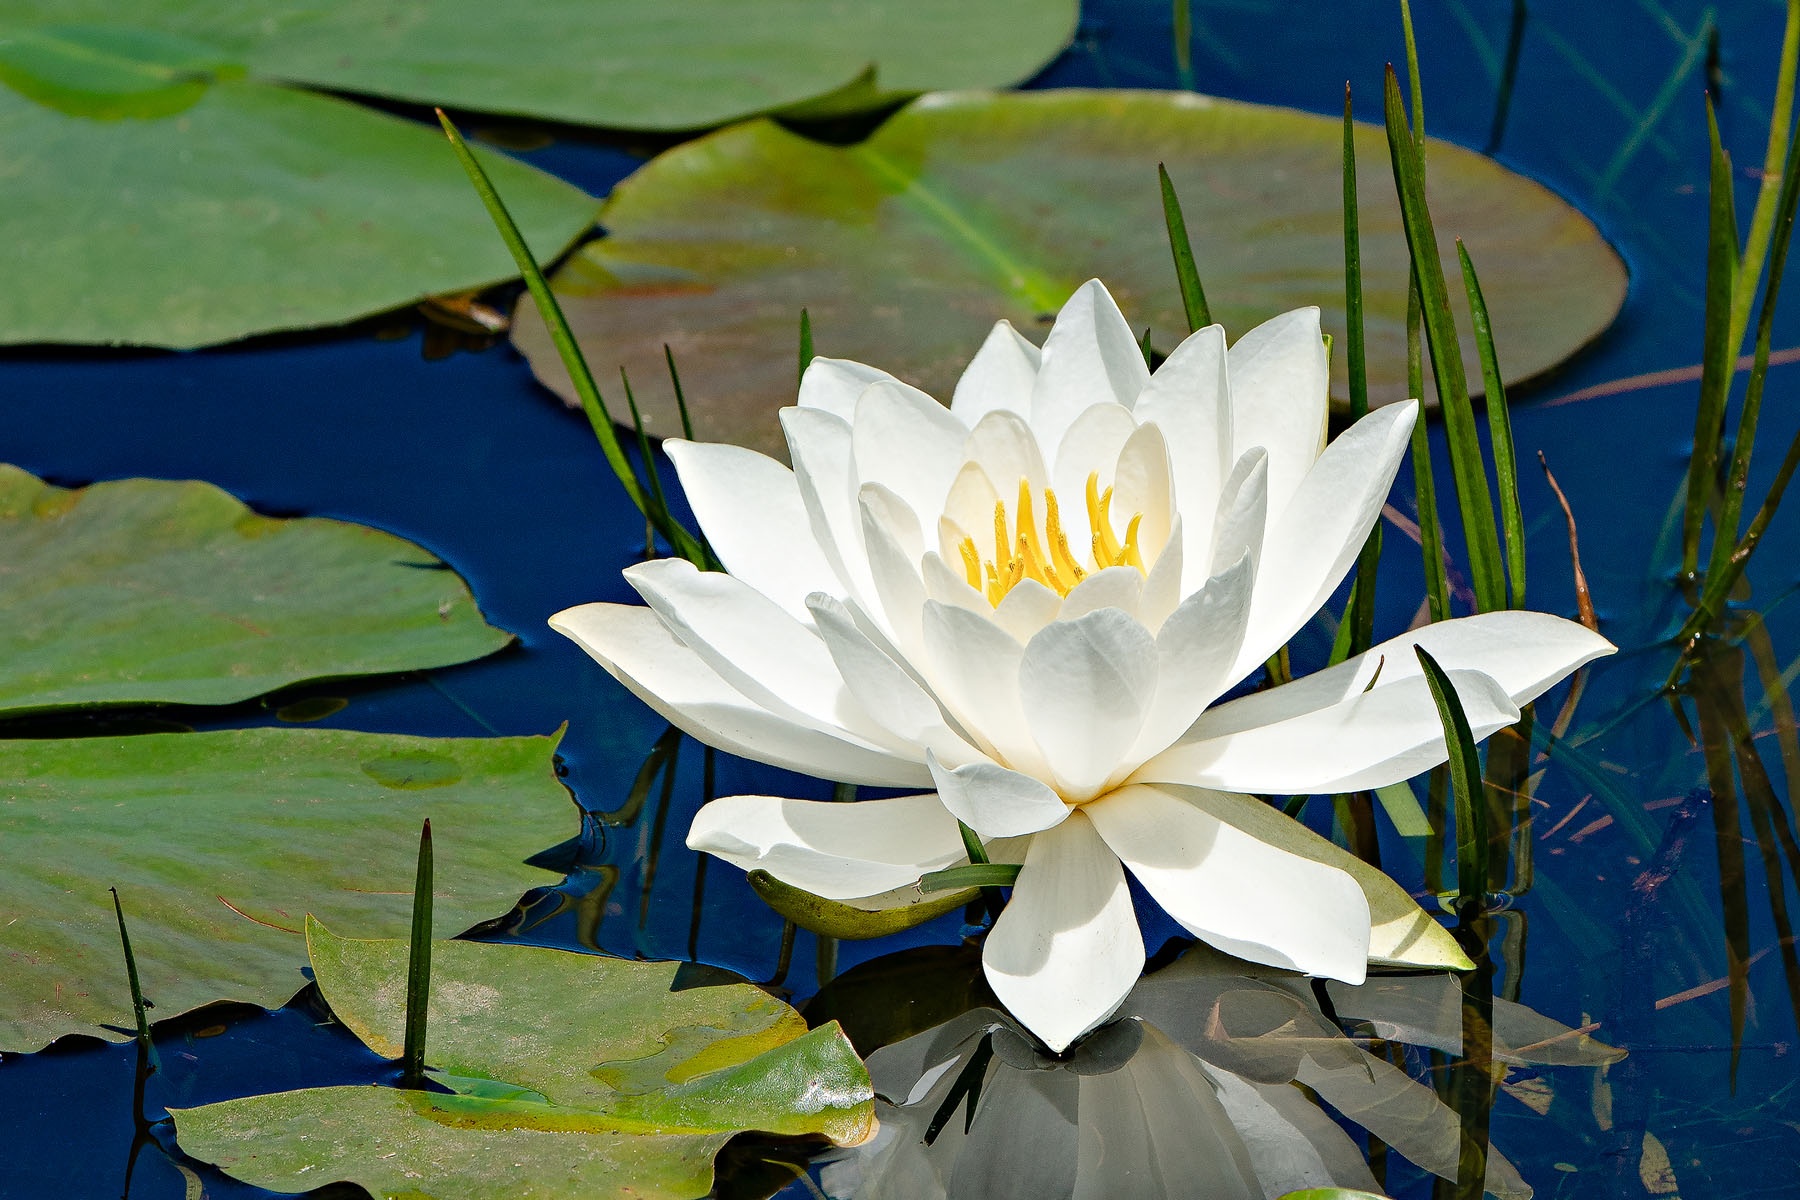 WATER LILY - I came upon this lily in a pond in New Hampshire. I’ve often photographed water lilies without much to show, but I am pleased with this shot.